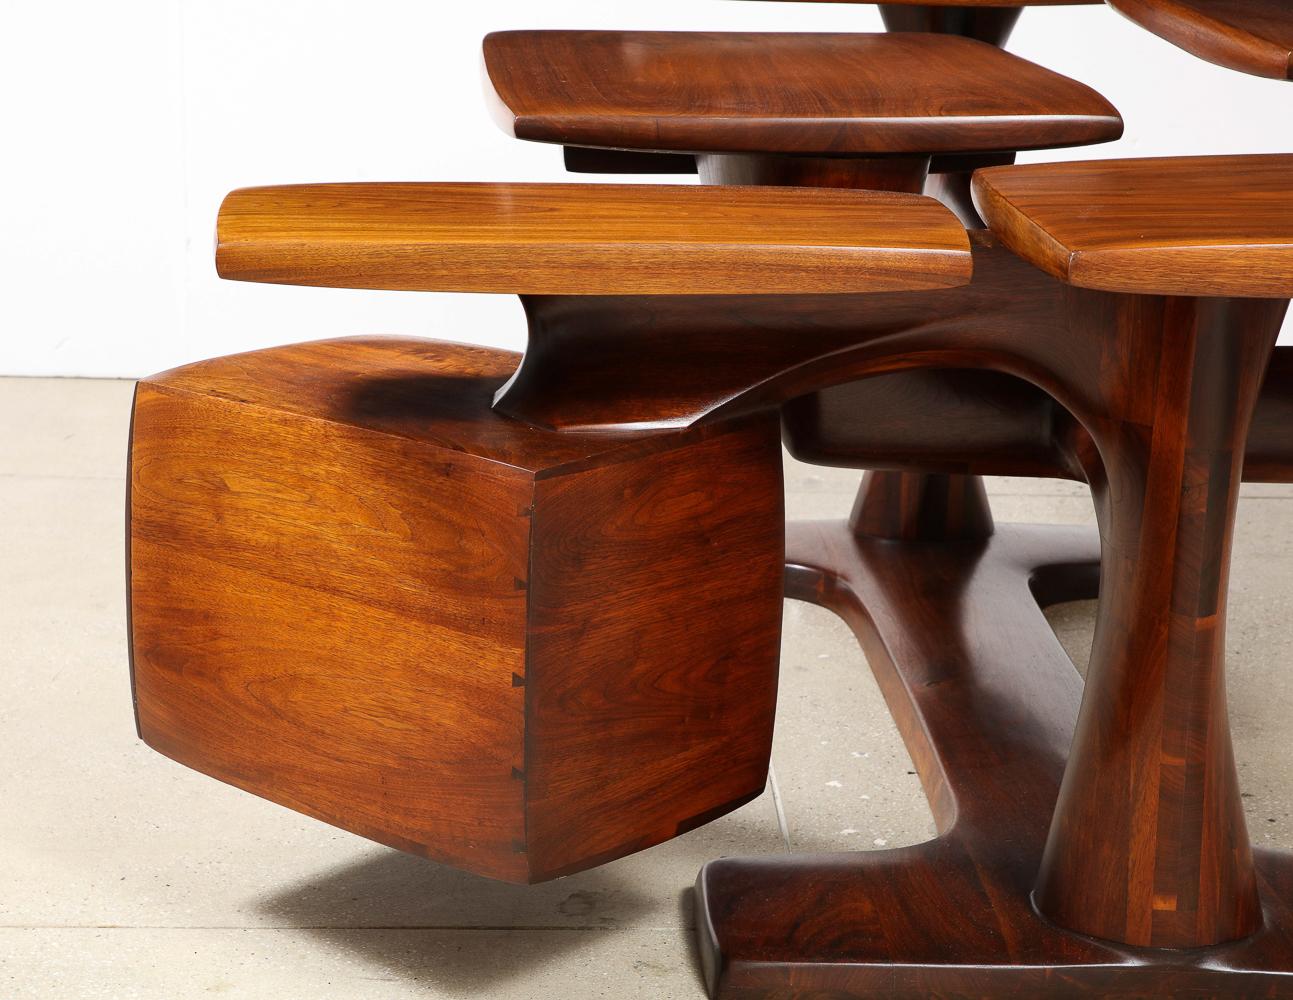 Walnut. Organic-from structure, with 5 independent arms. Each arm supporting a horizontal surface. This desk has 2 pencil drawers & one large file drawer. A fantastic California studio piece that was exhibited at the Pasadena Museum in 1971 as part